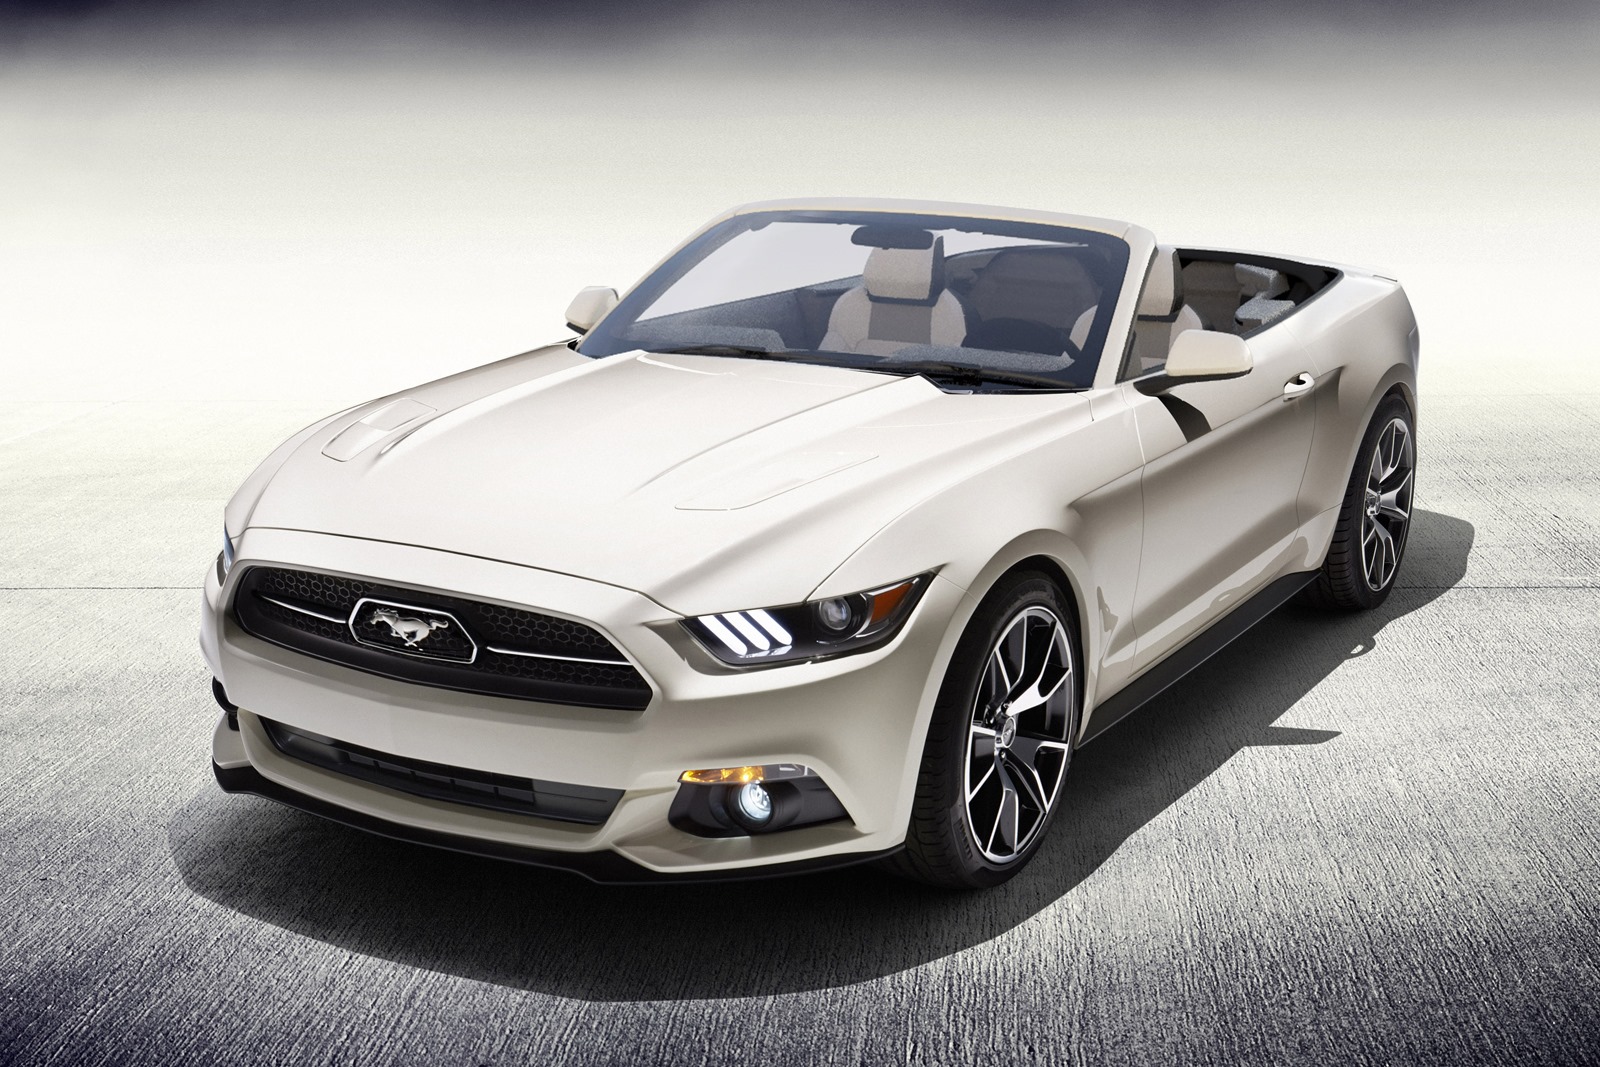 One-off 50 Year Limited Edition Mustang